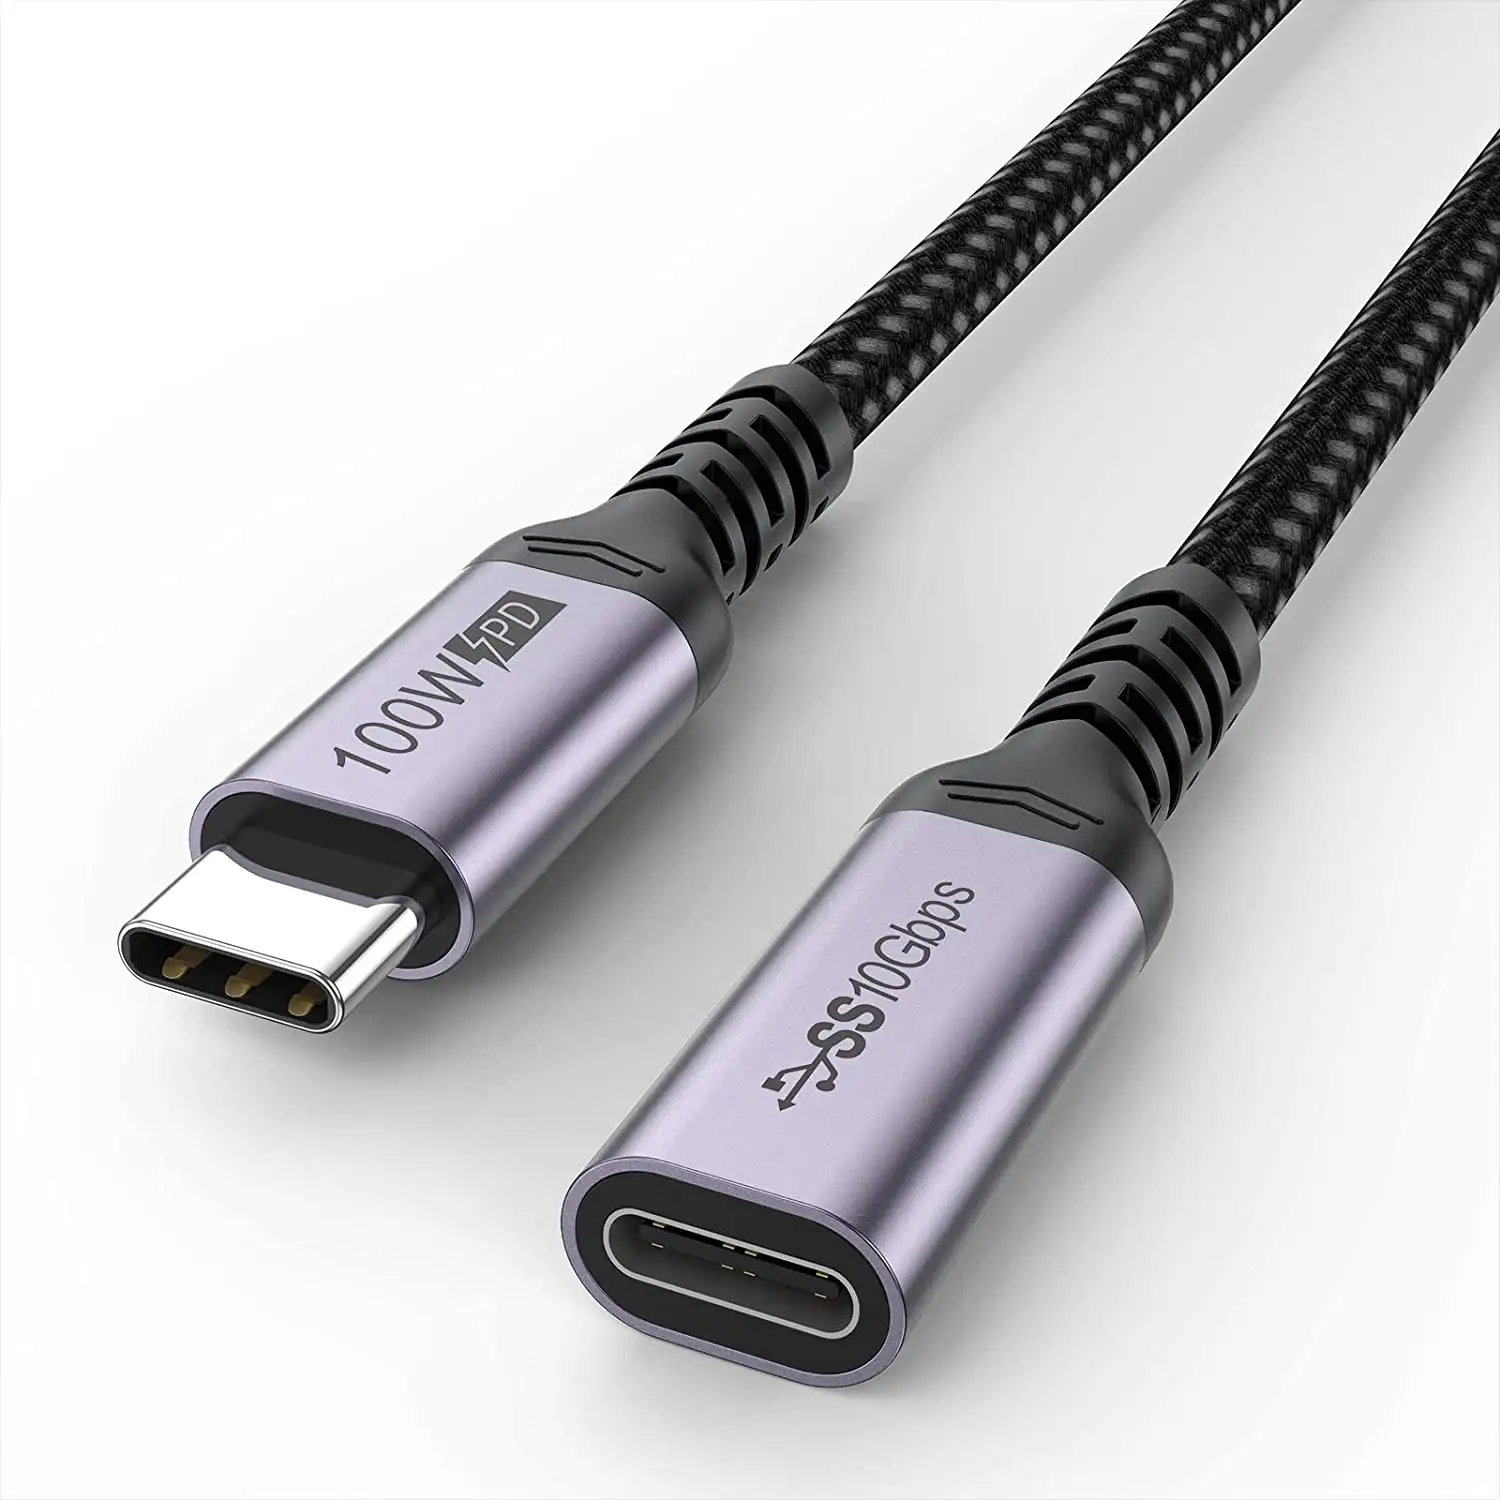 USB C male to female extension Cable Date Transfer Support 100W 10Gbps high speed 4K@60Hz Video USB C 3.2 Cable